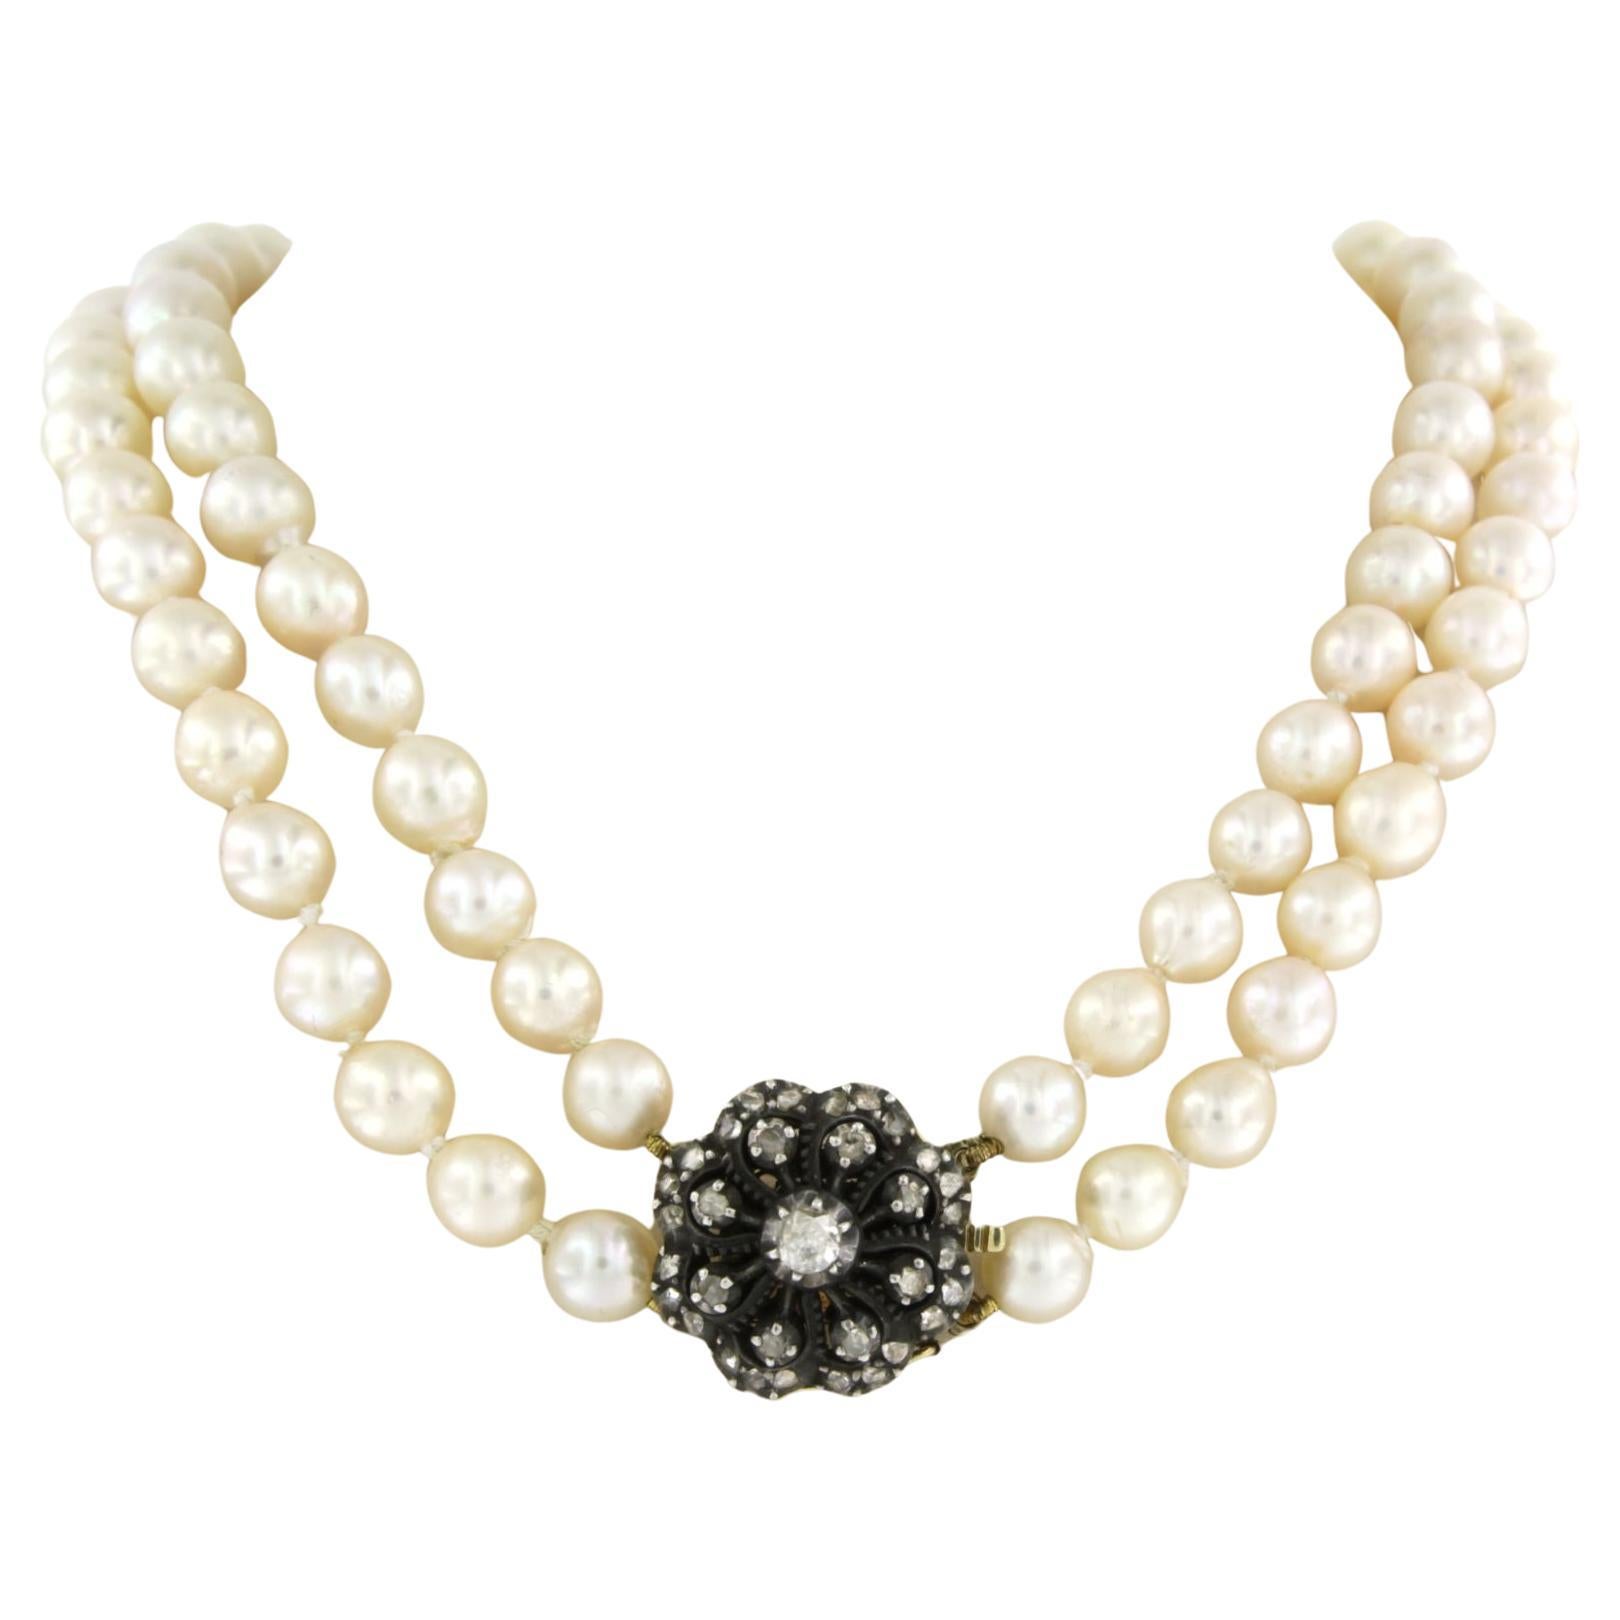 Gold and silver lock set with diamonds on a pearl bead necklace